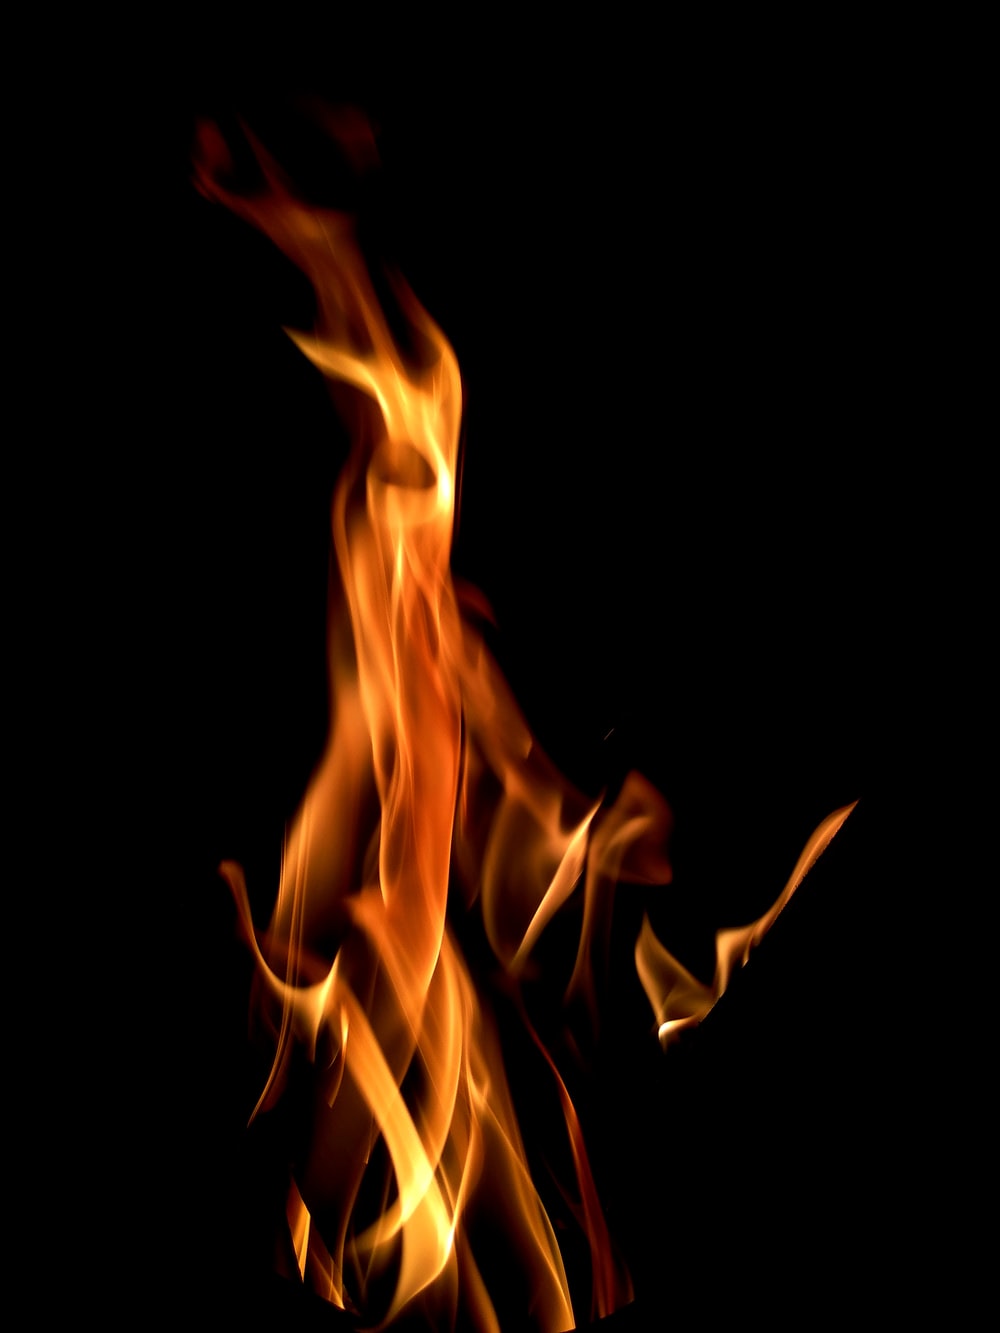 Fire Dance Picture. Download Free Image